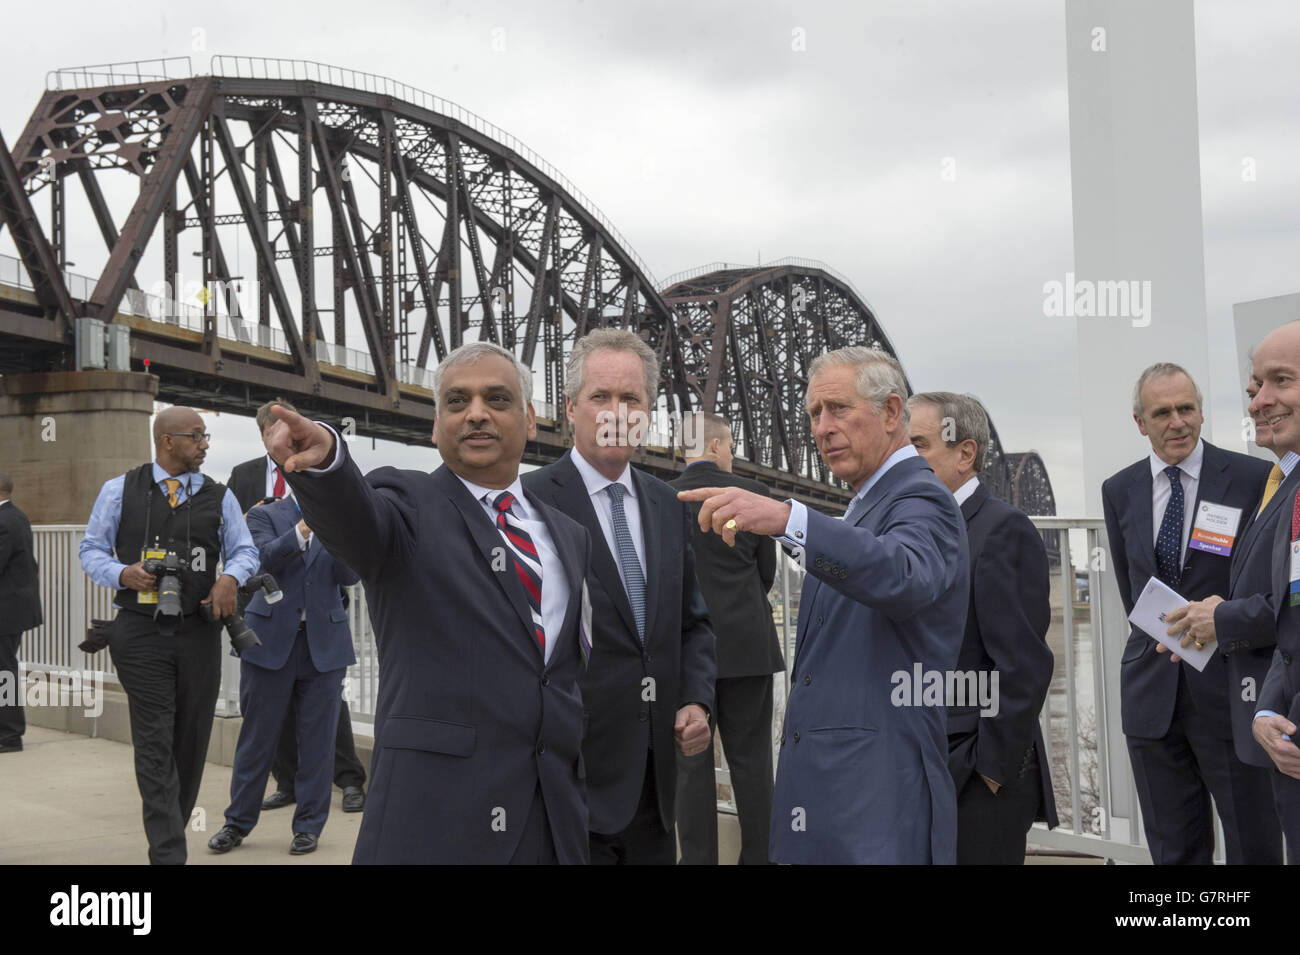 The Prince of Wales talks with the Mayor of Louisville, Kentucky, Greg Fischer (centre) and Dr. Aruni Bhatnagar (front left) from the University of Louisville Department of Medicine at the Big Four Bridge in Louisville, Kentucky. PRESS ASSOCIATION Photo. Picture date: Friday March 20, 2015. See PA story ROYAL Charles. Photo credit should read: Arthur Edwards/The Sun/PA Wire Stock Photo